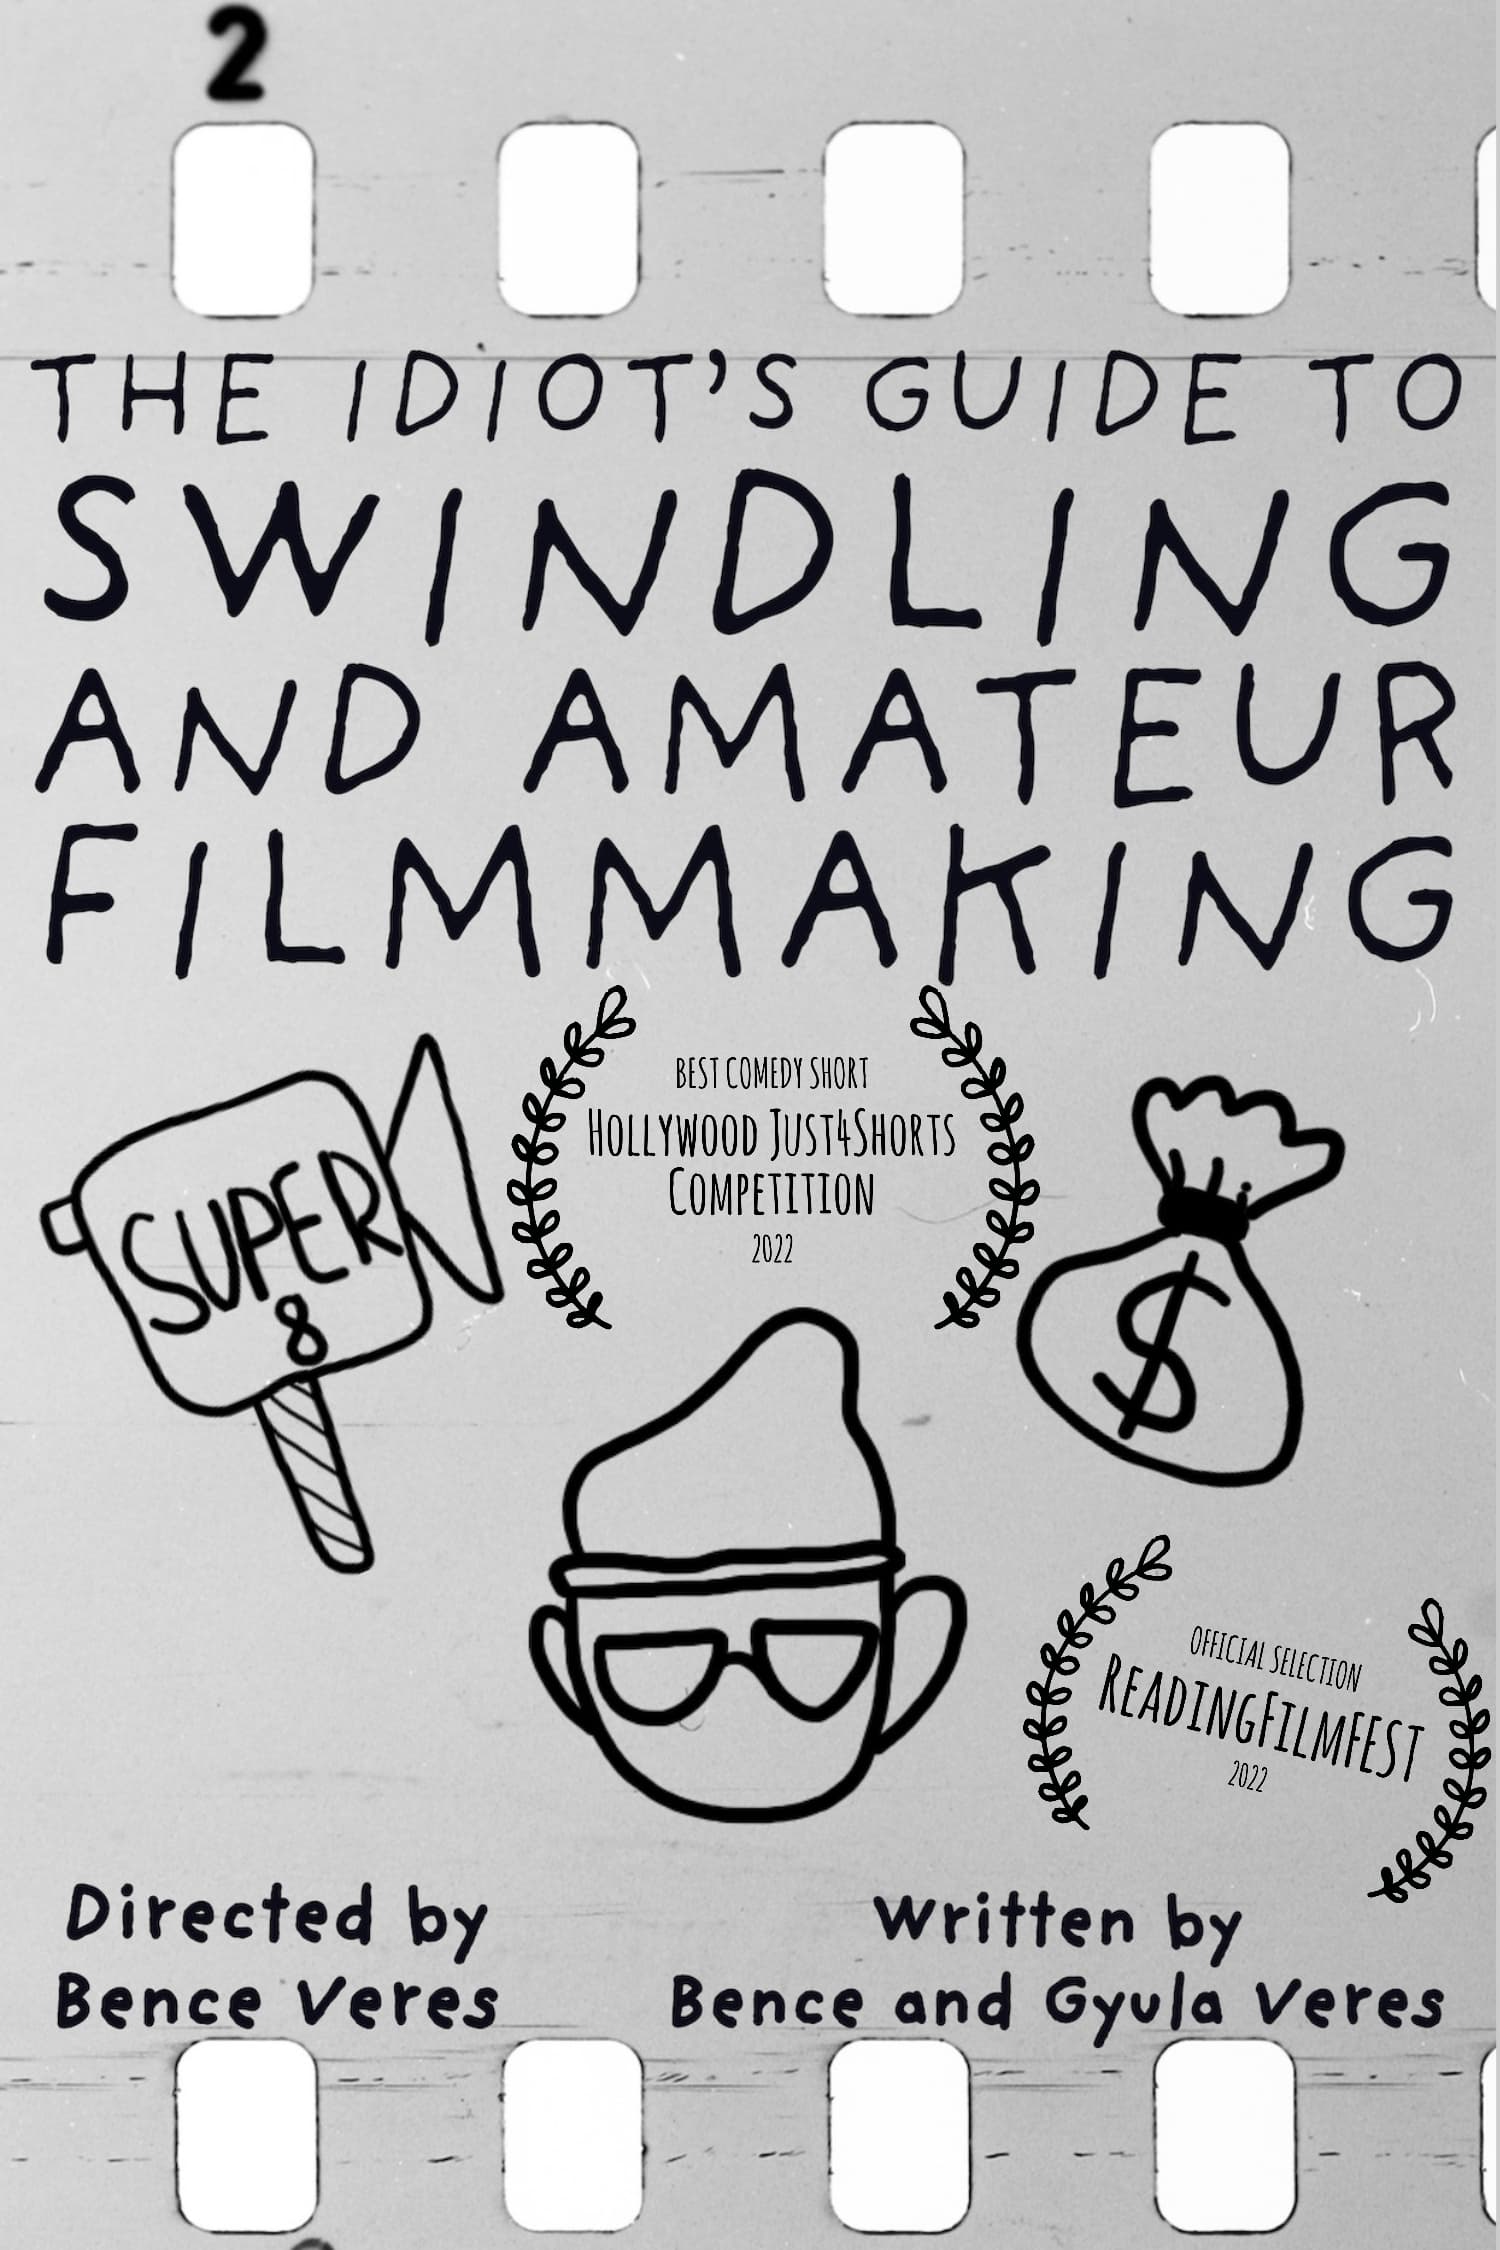 The Idiot's Guide to Swindling and Amateur Filmmaking